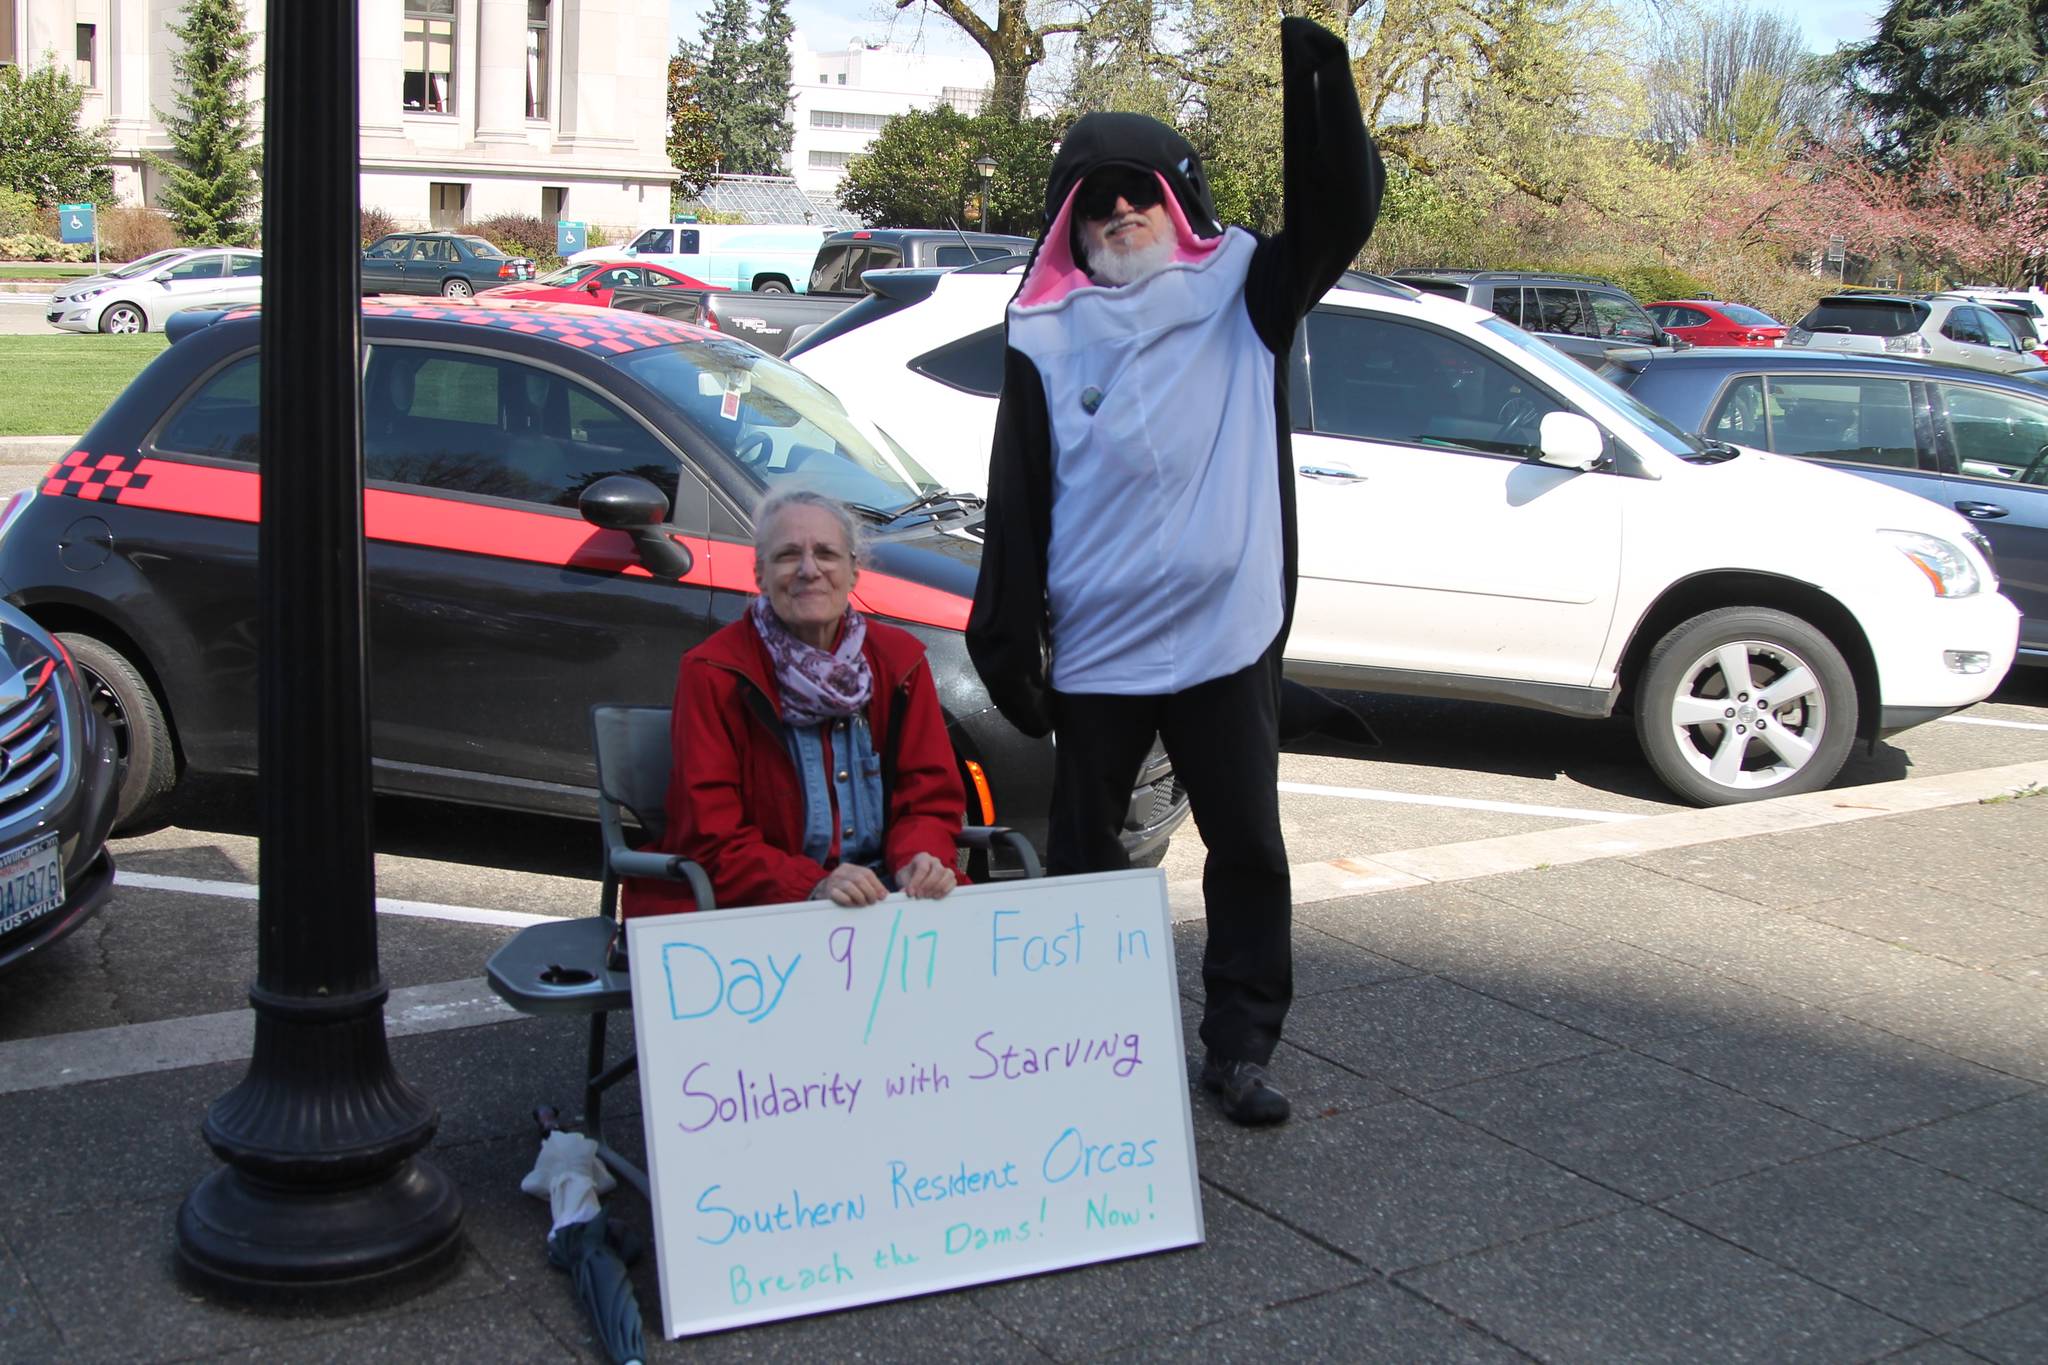 Lanni Johnson sitting in front of the Capitol building steps where she has been on a hunger strike for the last nine days to save the Southern Resident Orcas. Johnson is joined by supporter, Phil Myers, who can be seen in an orca onesie. COURTESY PHOTO, Emma Epperly, WNPA Olympia News Bureau